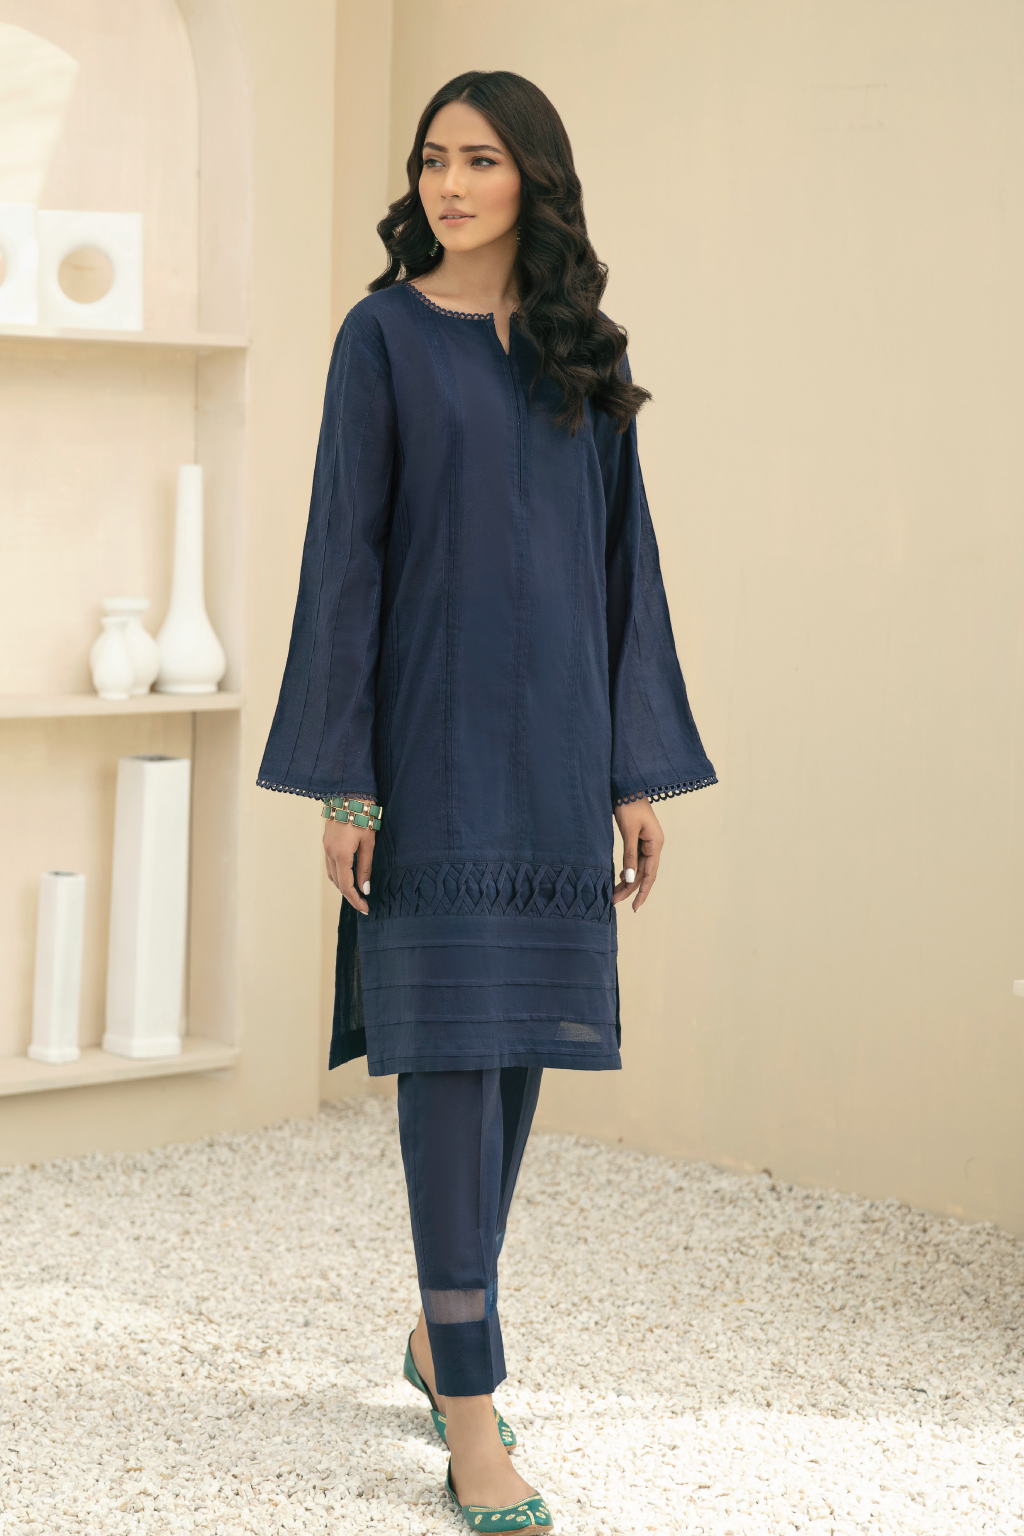 Iznik Pret Wear 2021 | PERI WRINKLE Navy Blue 1 piece lawn dress is most popular for Eid dress and summer outfits. We have wide range of stitched and Readymade dresses of Iznik lawn 2021, Iznik pret '21. This Eid get yourself elegant and classy outfit of Iznik in USA, UK, France, Spain from Lebaasonline at SALE price!